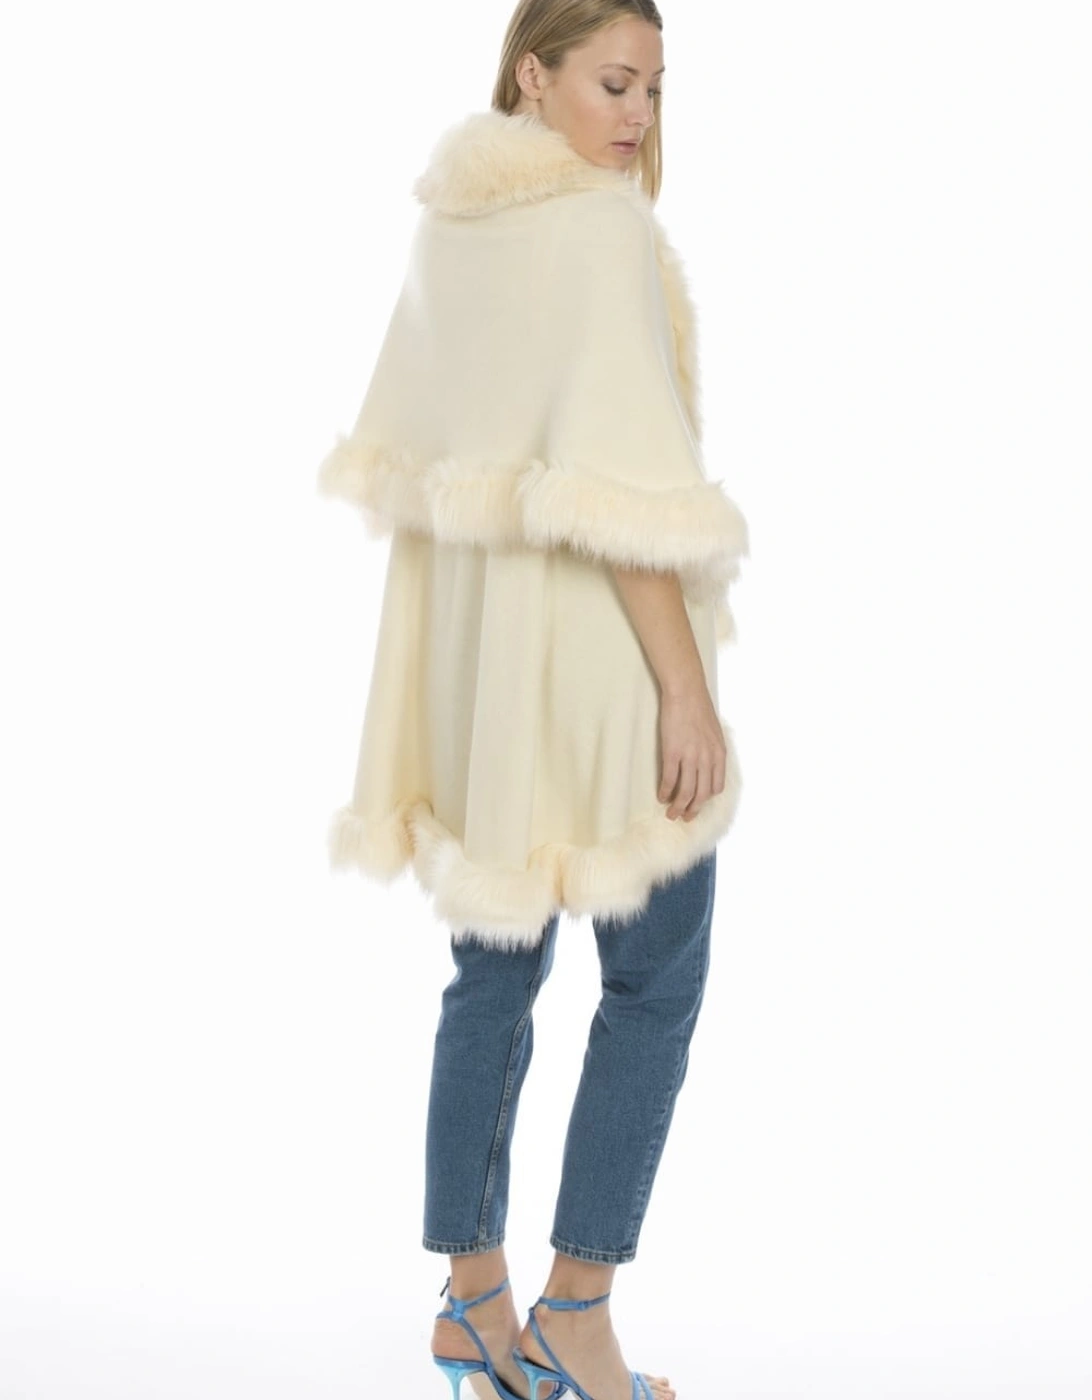 Cream Knitted Luxury Faux Fur Cape